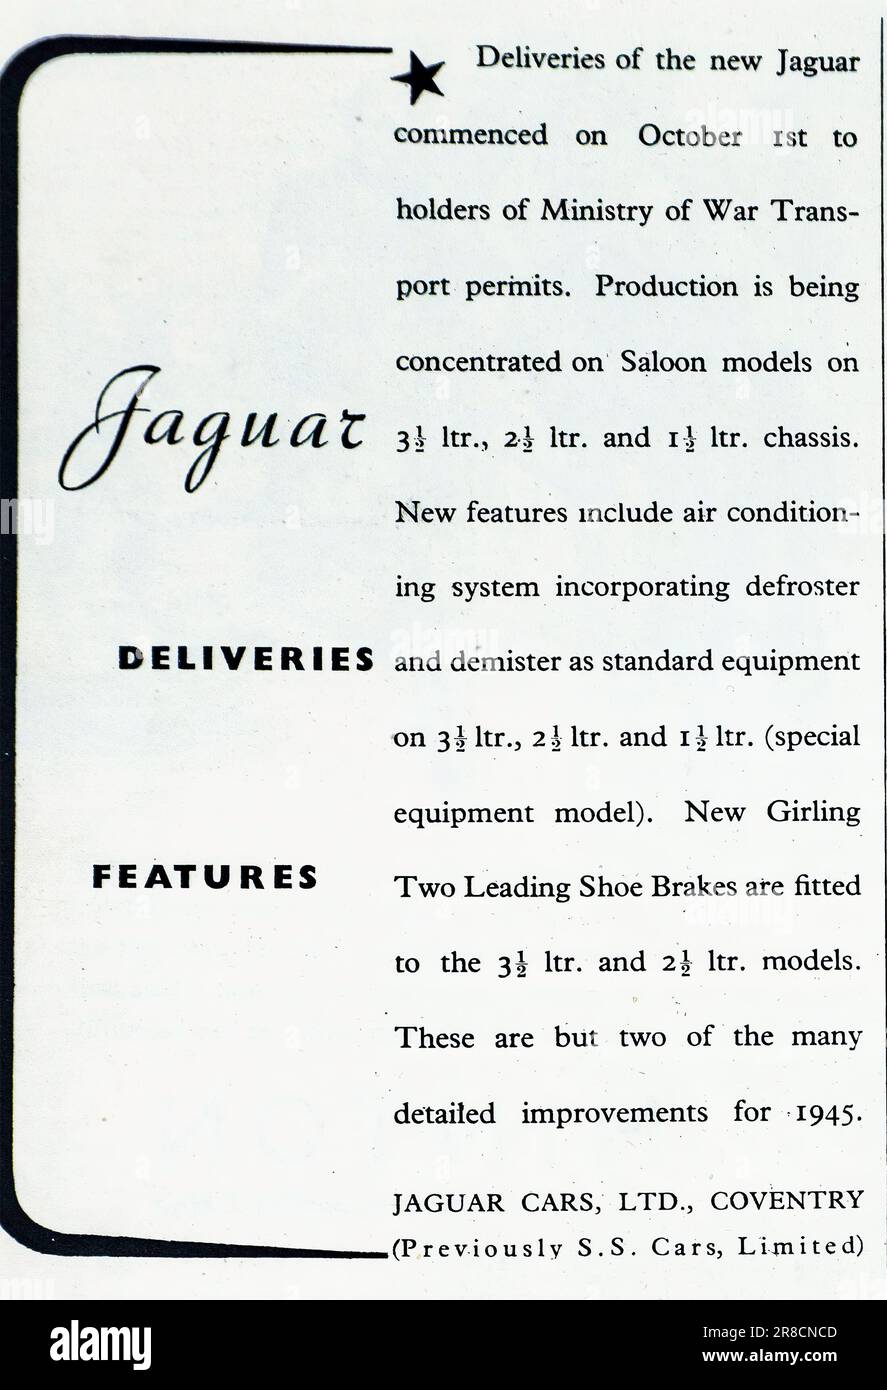 A 1945 post war advertisement for Jaguar Cars. Production of Jaguar cars recommenced in October 1944 as World War 2 was nearing conclusion. Sales however were limited to holders of Ministry of War Transport permits. During the war no private cars, commercial trucks or motor parts were made for personal use. The British car industry reorganised to produce vehicles  and equipment for use in the war.  Jaguar in particular switched to making components for military aircraft. This advertisement lists the equipment being installed in these new cars, such as air conditioner, defroster, demister. Stock Photo